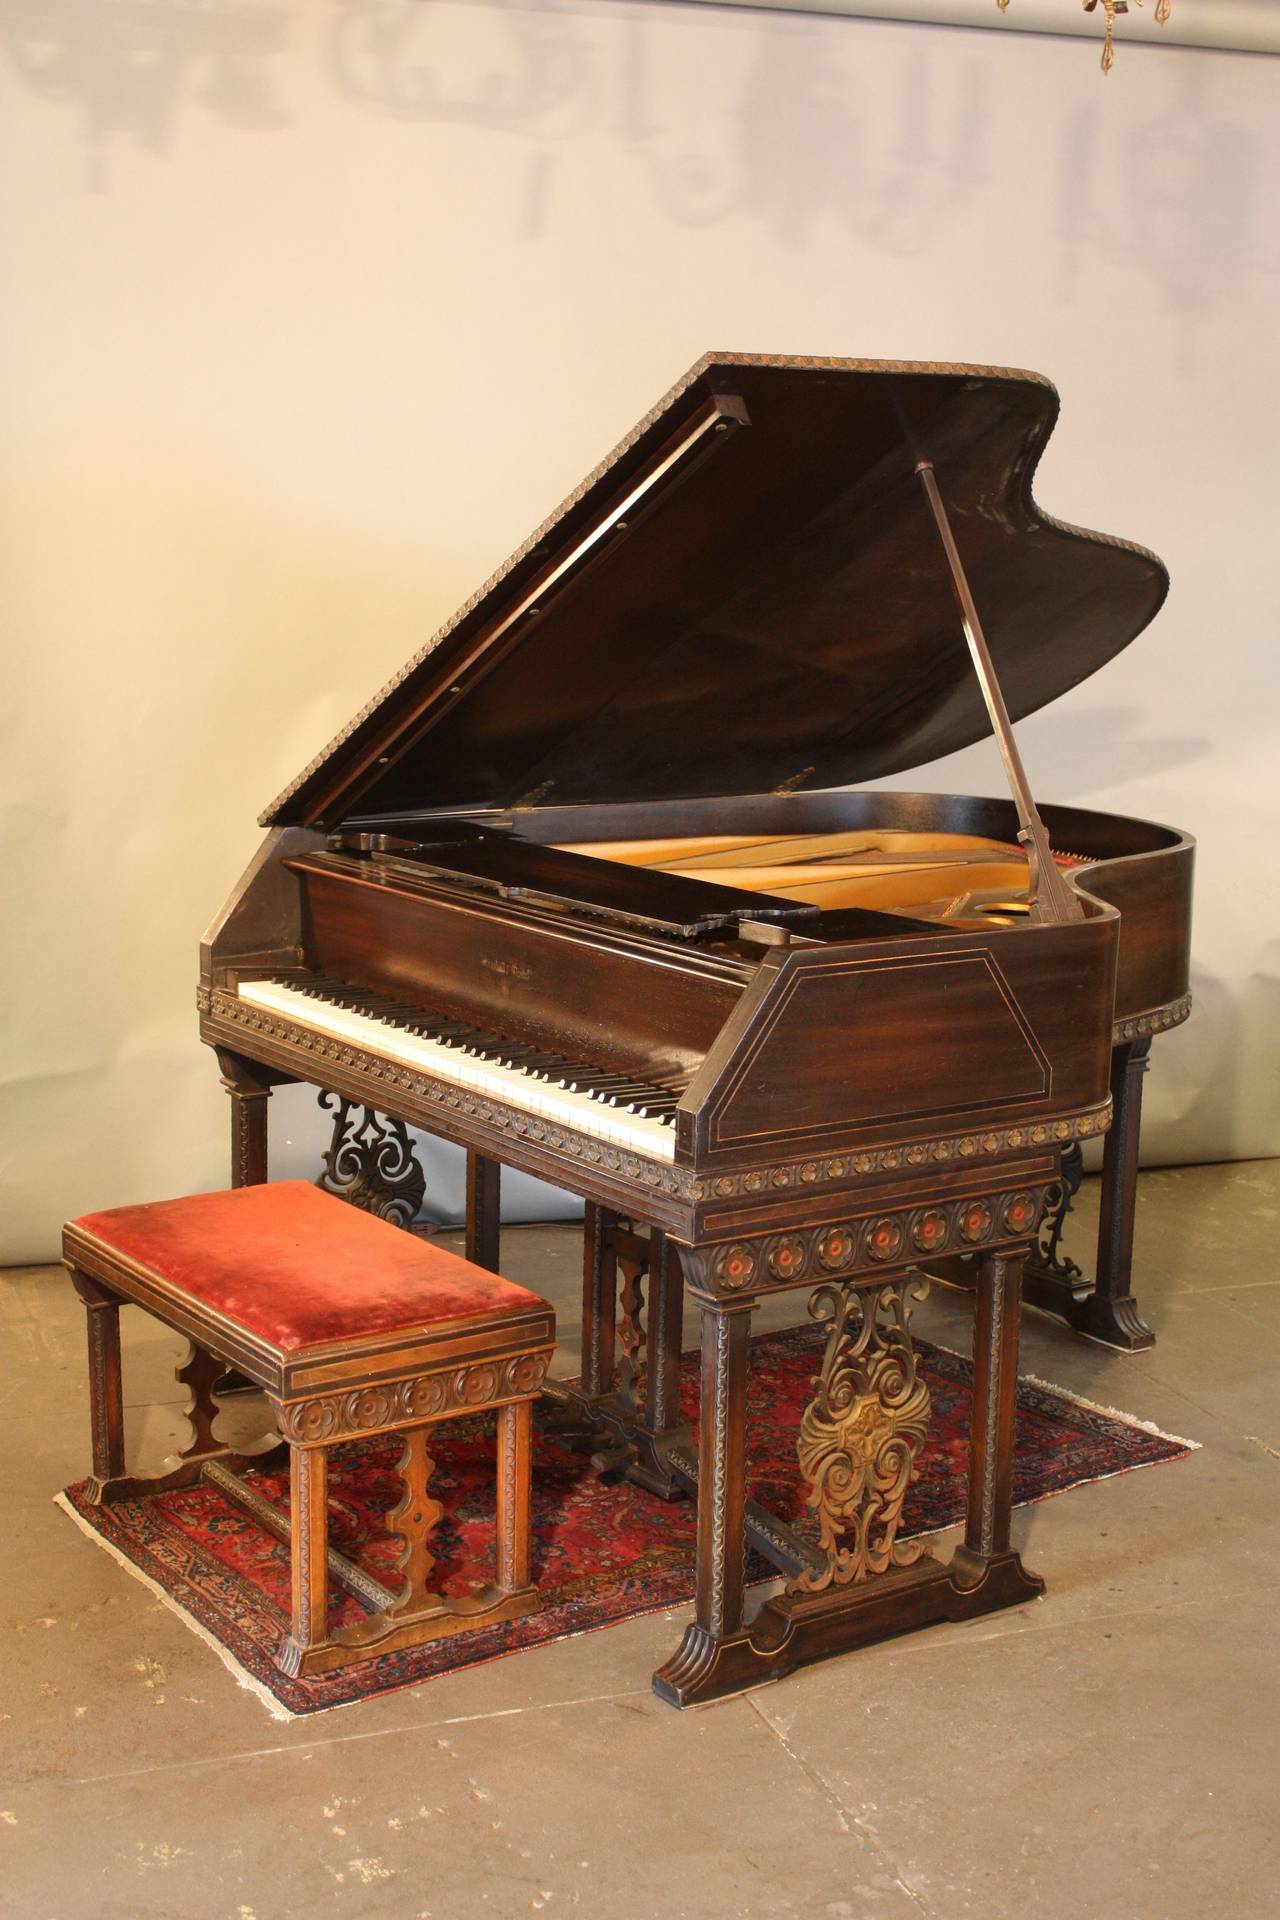 This amazing Spanish Revival style grand features an extraordinarily lovely case of English walnut, polychrome wood and iron details, circa 1920s. It retains its original finish, ivories, and matching bench, and plays beautifully. It measures